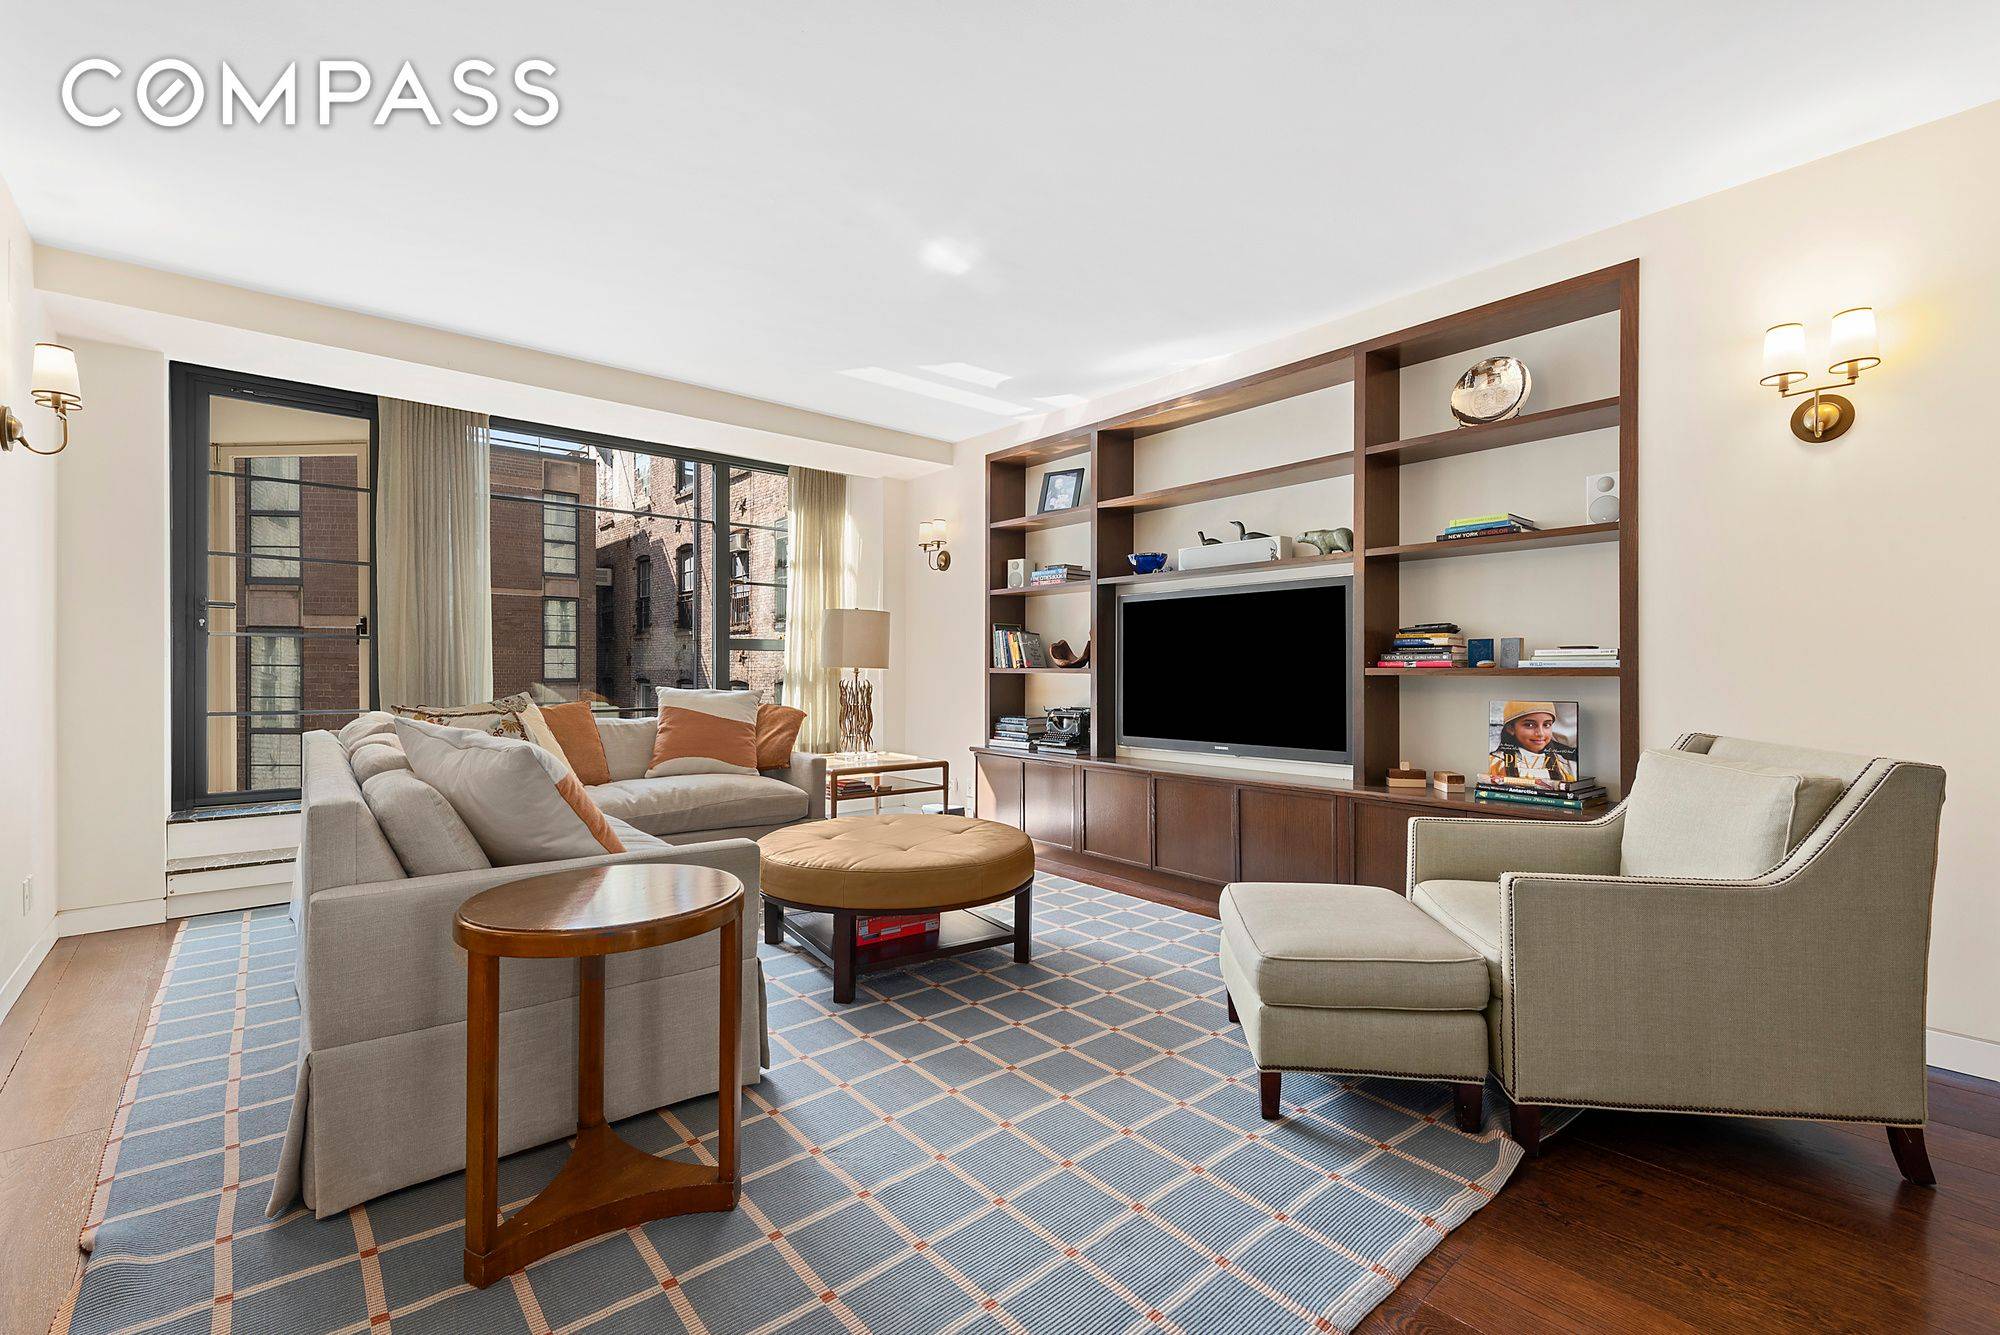 An expansive and renovated 4 bedroom and 3 bath home in the legendary Butterfield House located on one of the most sought after blocks in the heart of Greenwich Village ...